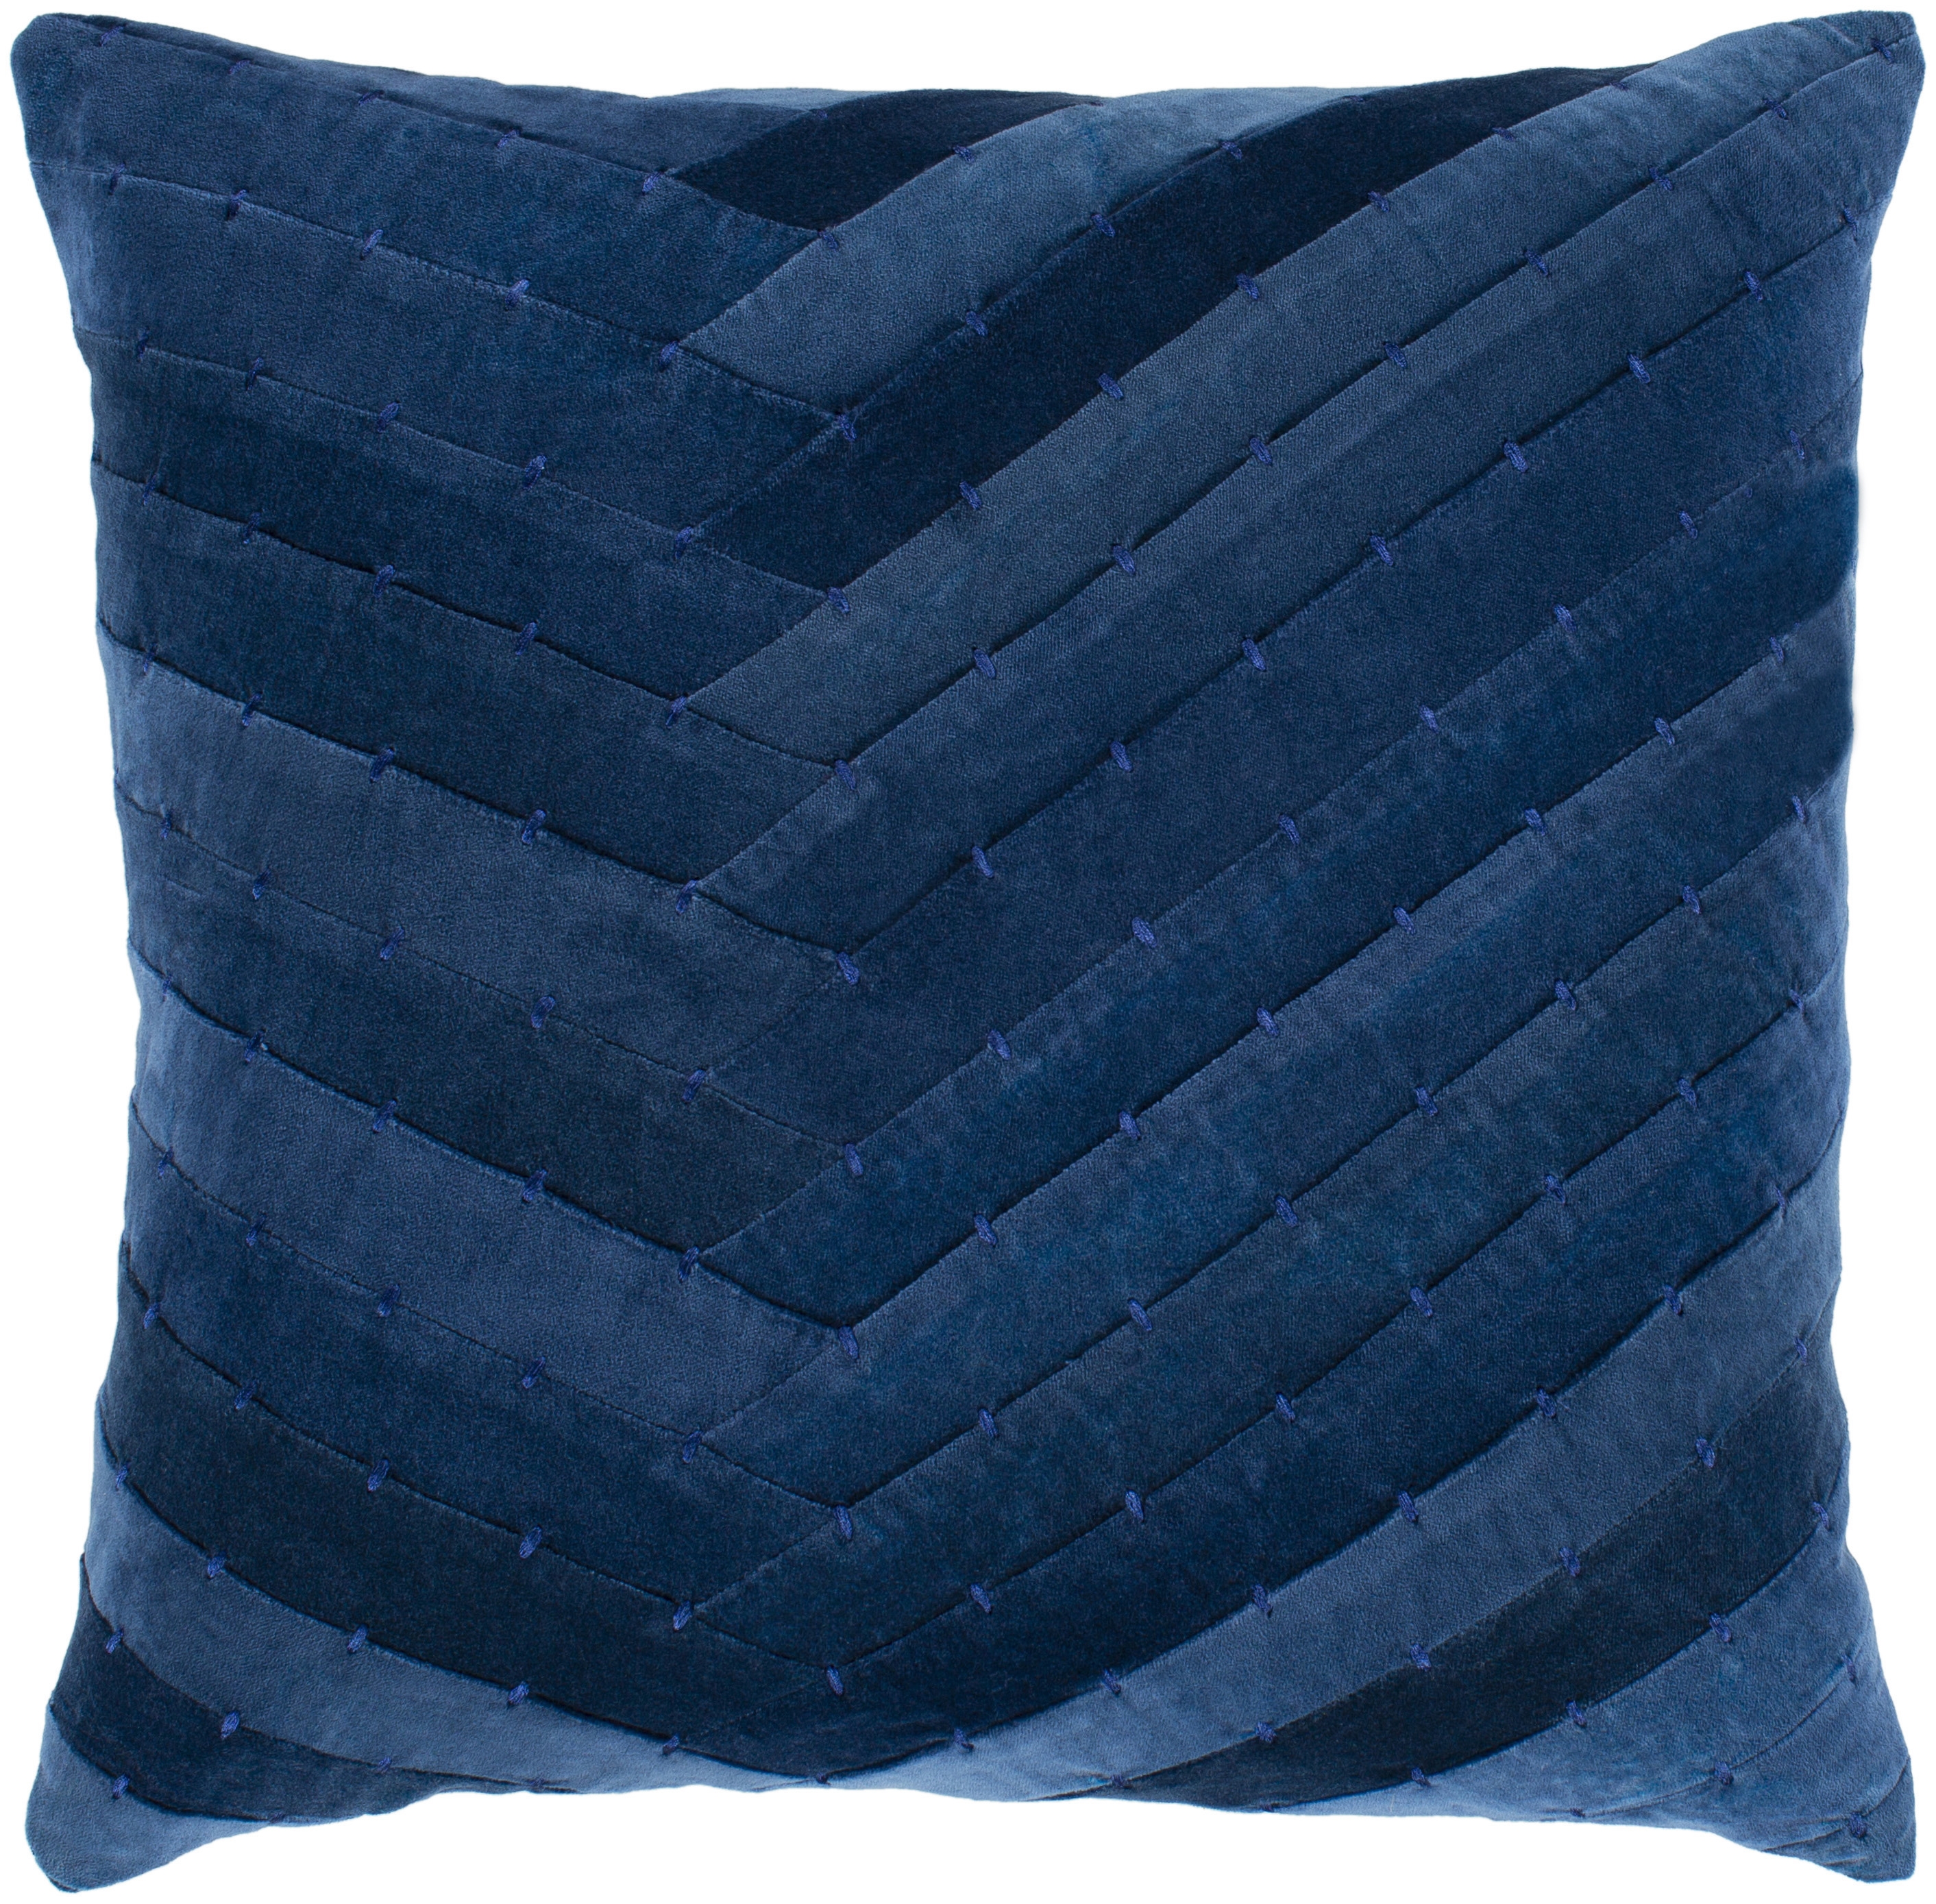 Aviana Throw Pillow, 20" x 20", with down insert - Image 0